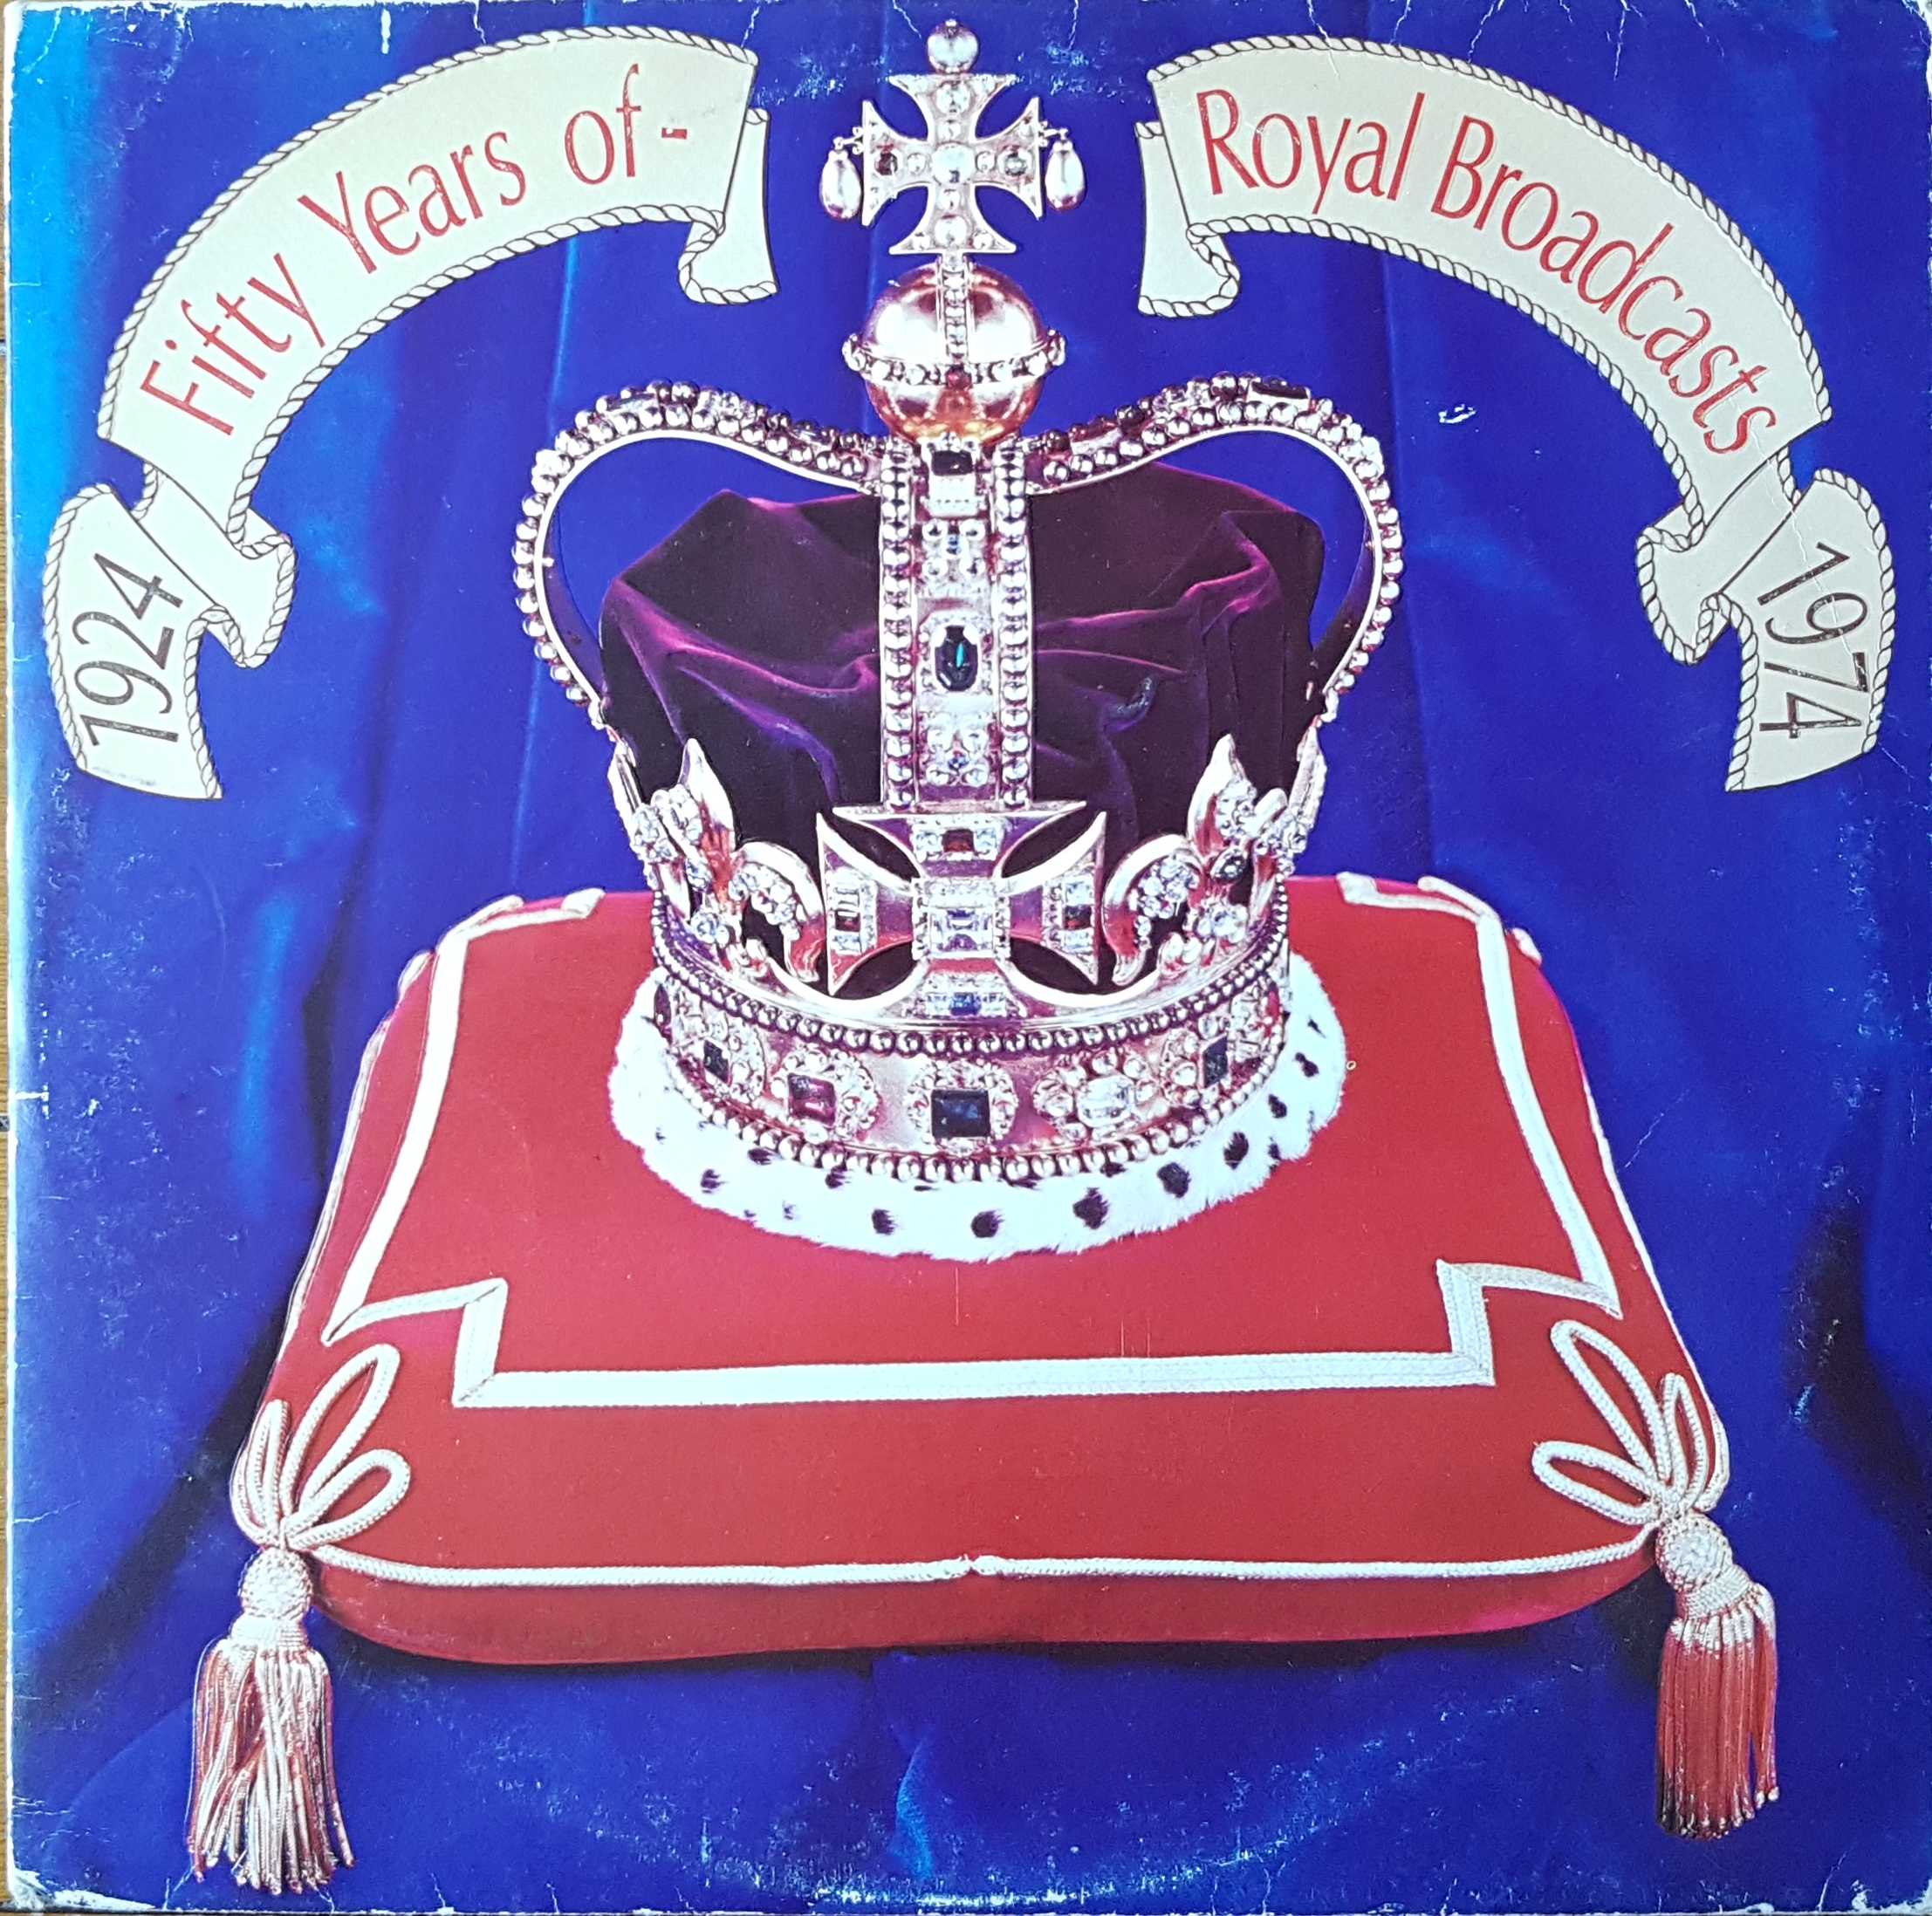 Picture of REJ 187 50 years of Royal broadcasts by artist Various from the BBC albums - Records and Tapes library